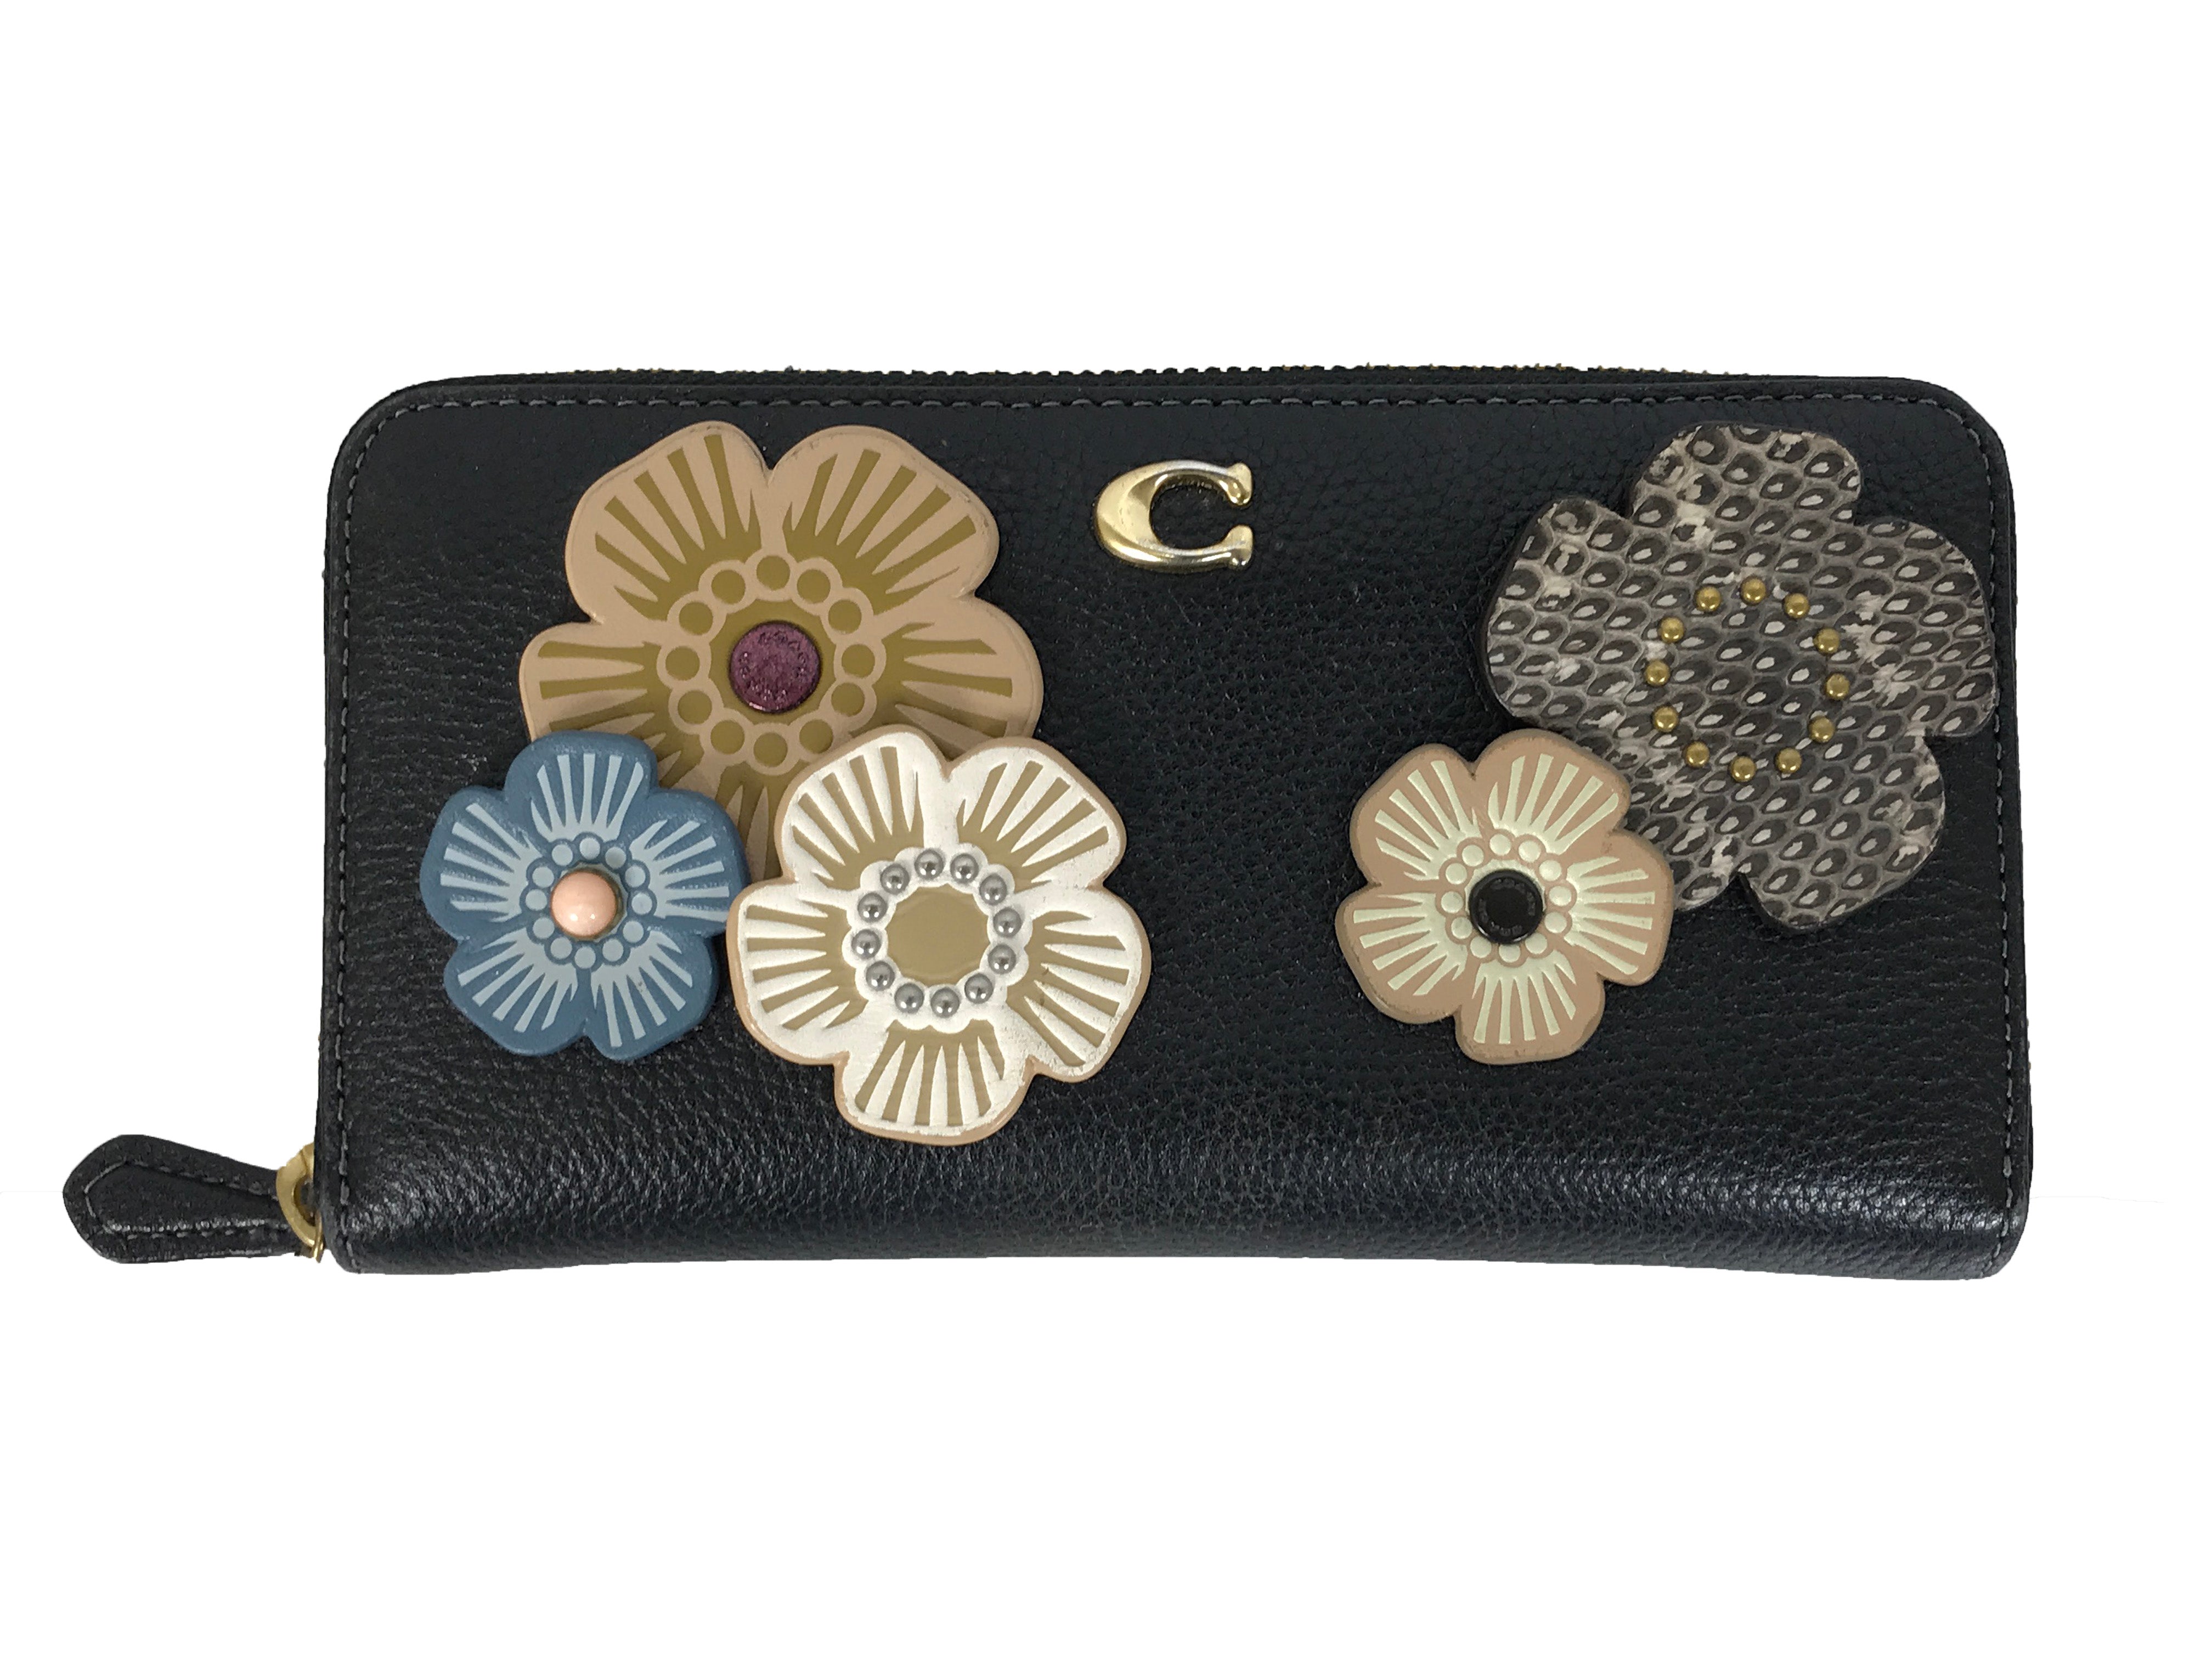 Coach Black Leather Wallet With Flower Embellishments